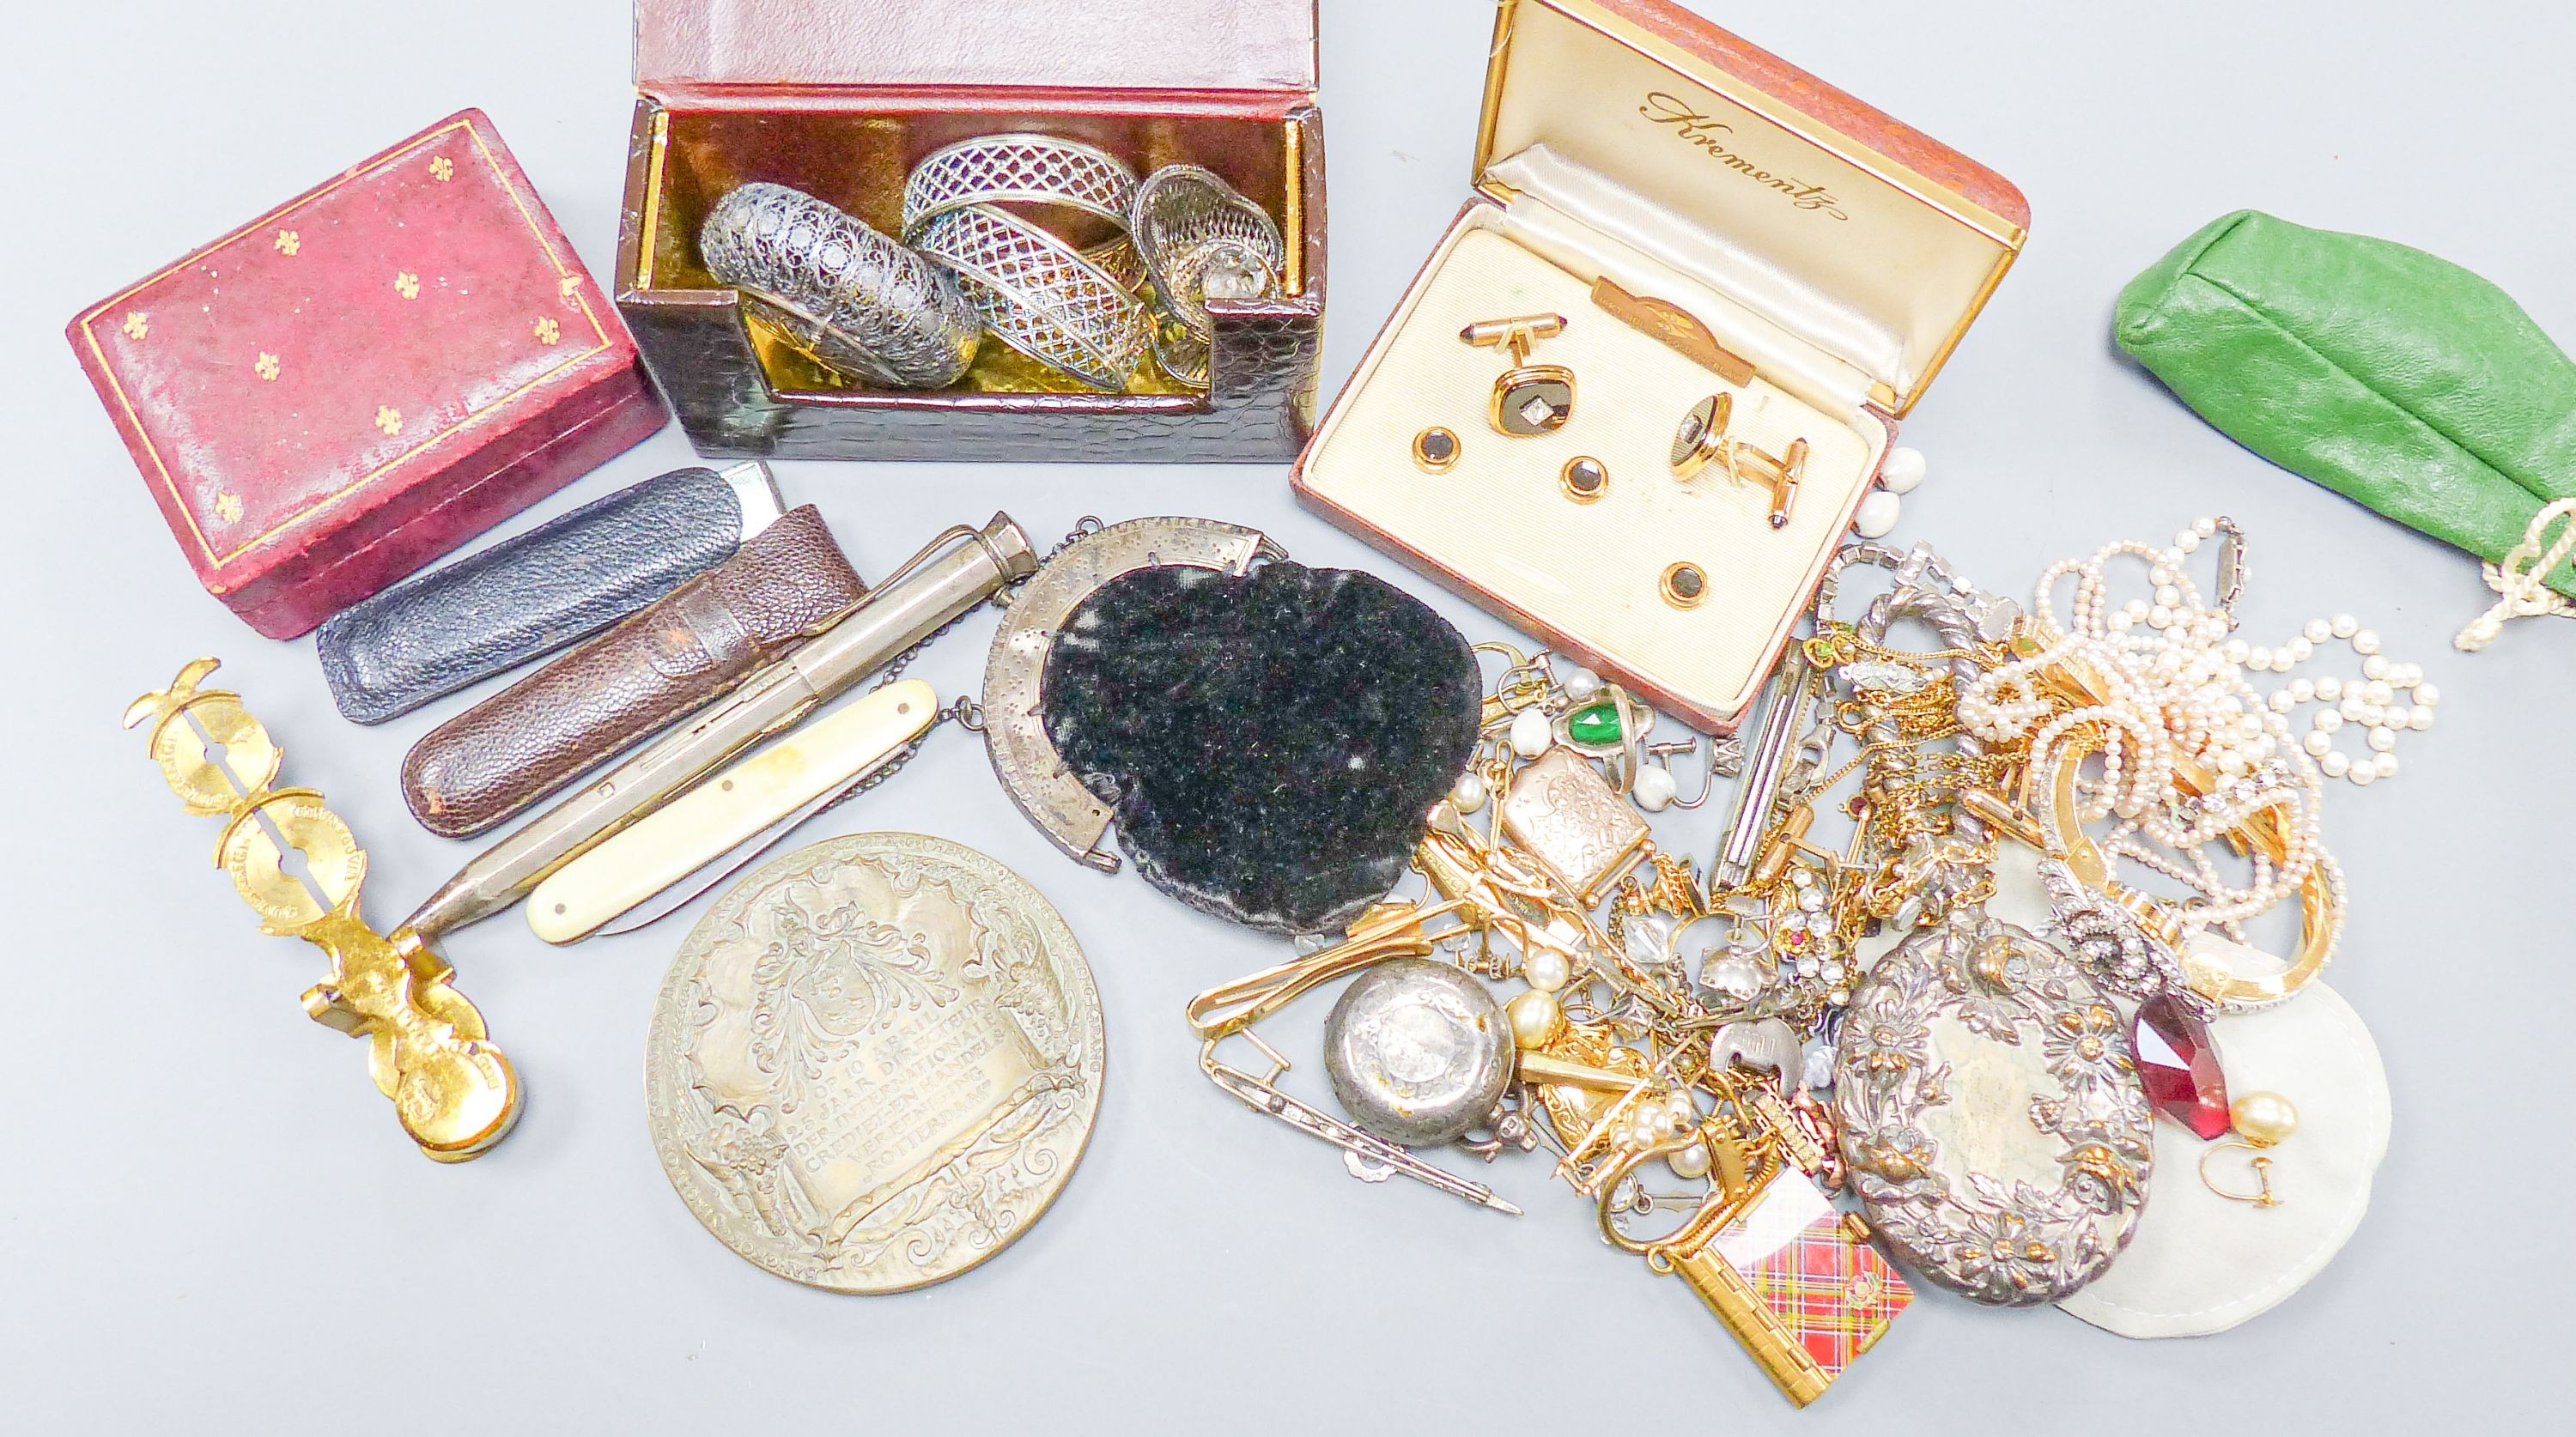 A vintage 'Marvin Hermetic' watch, various pens, a penknife, a set of guinea scales, costume jewellery and sundry items.